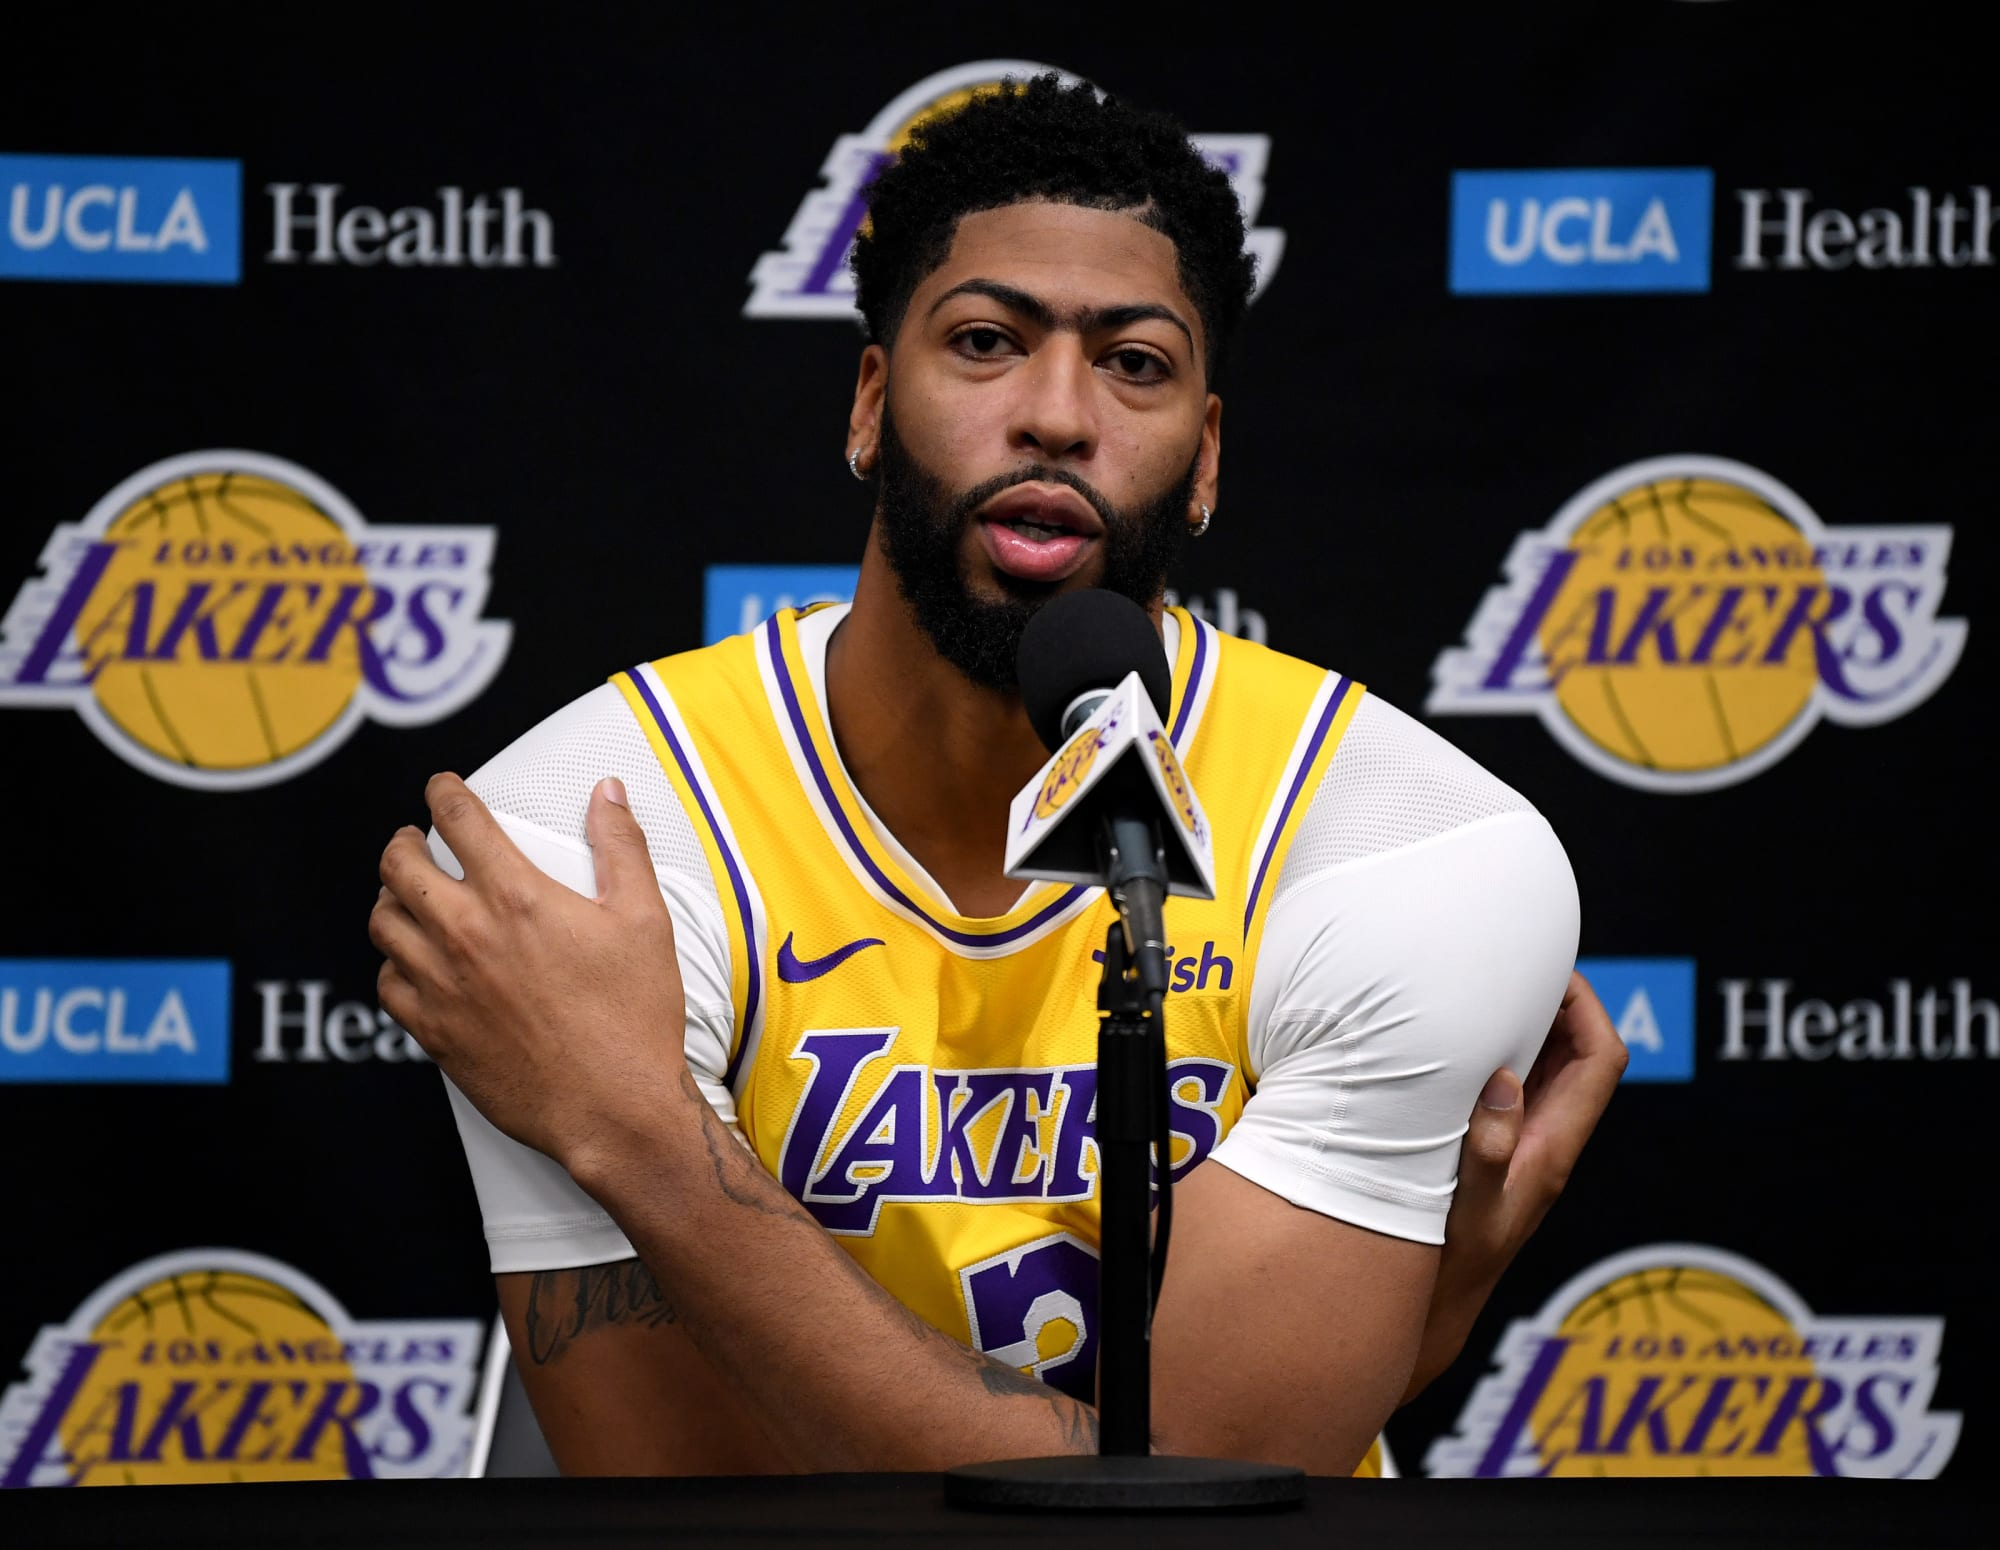 Los Angeles Lakers The Record That The Lakers Are Primed To Break